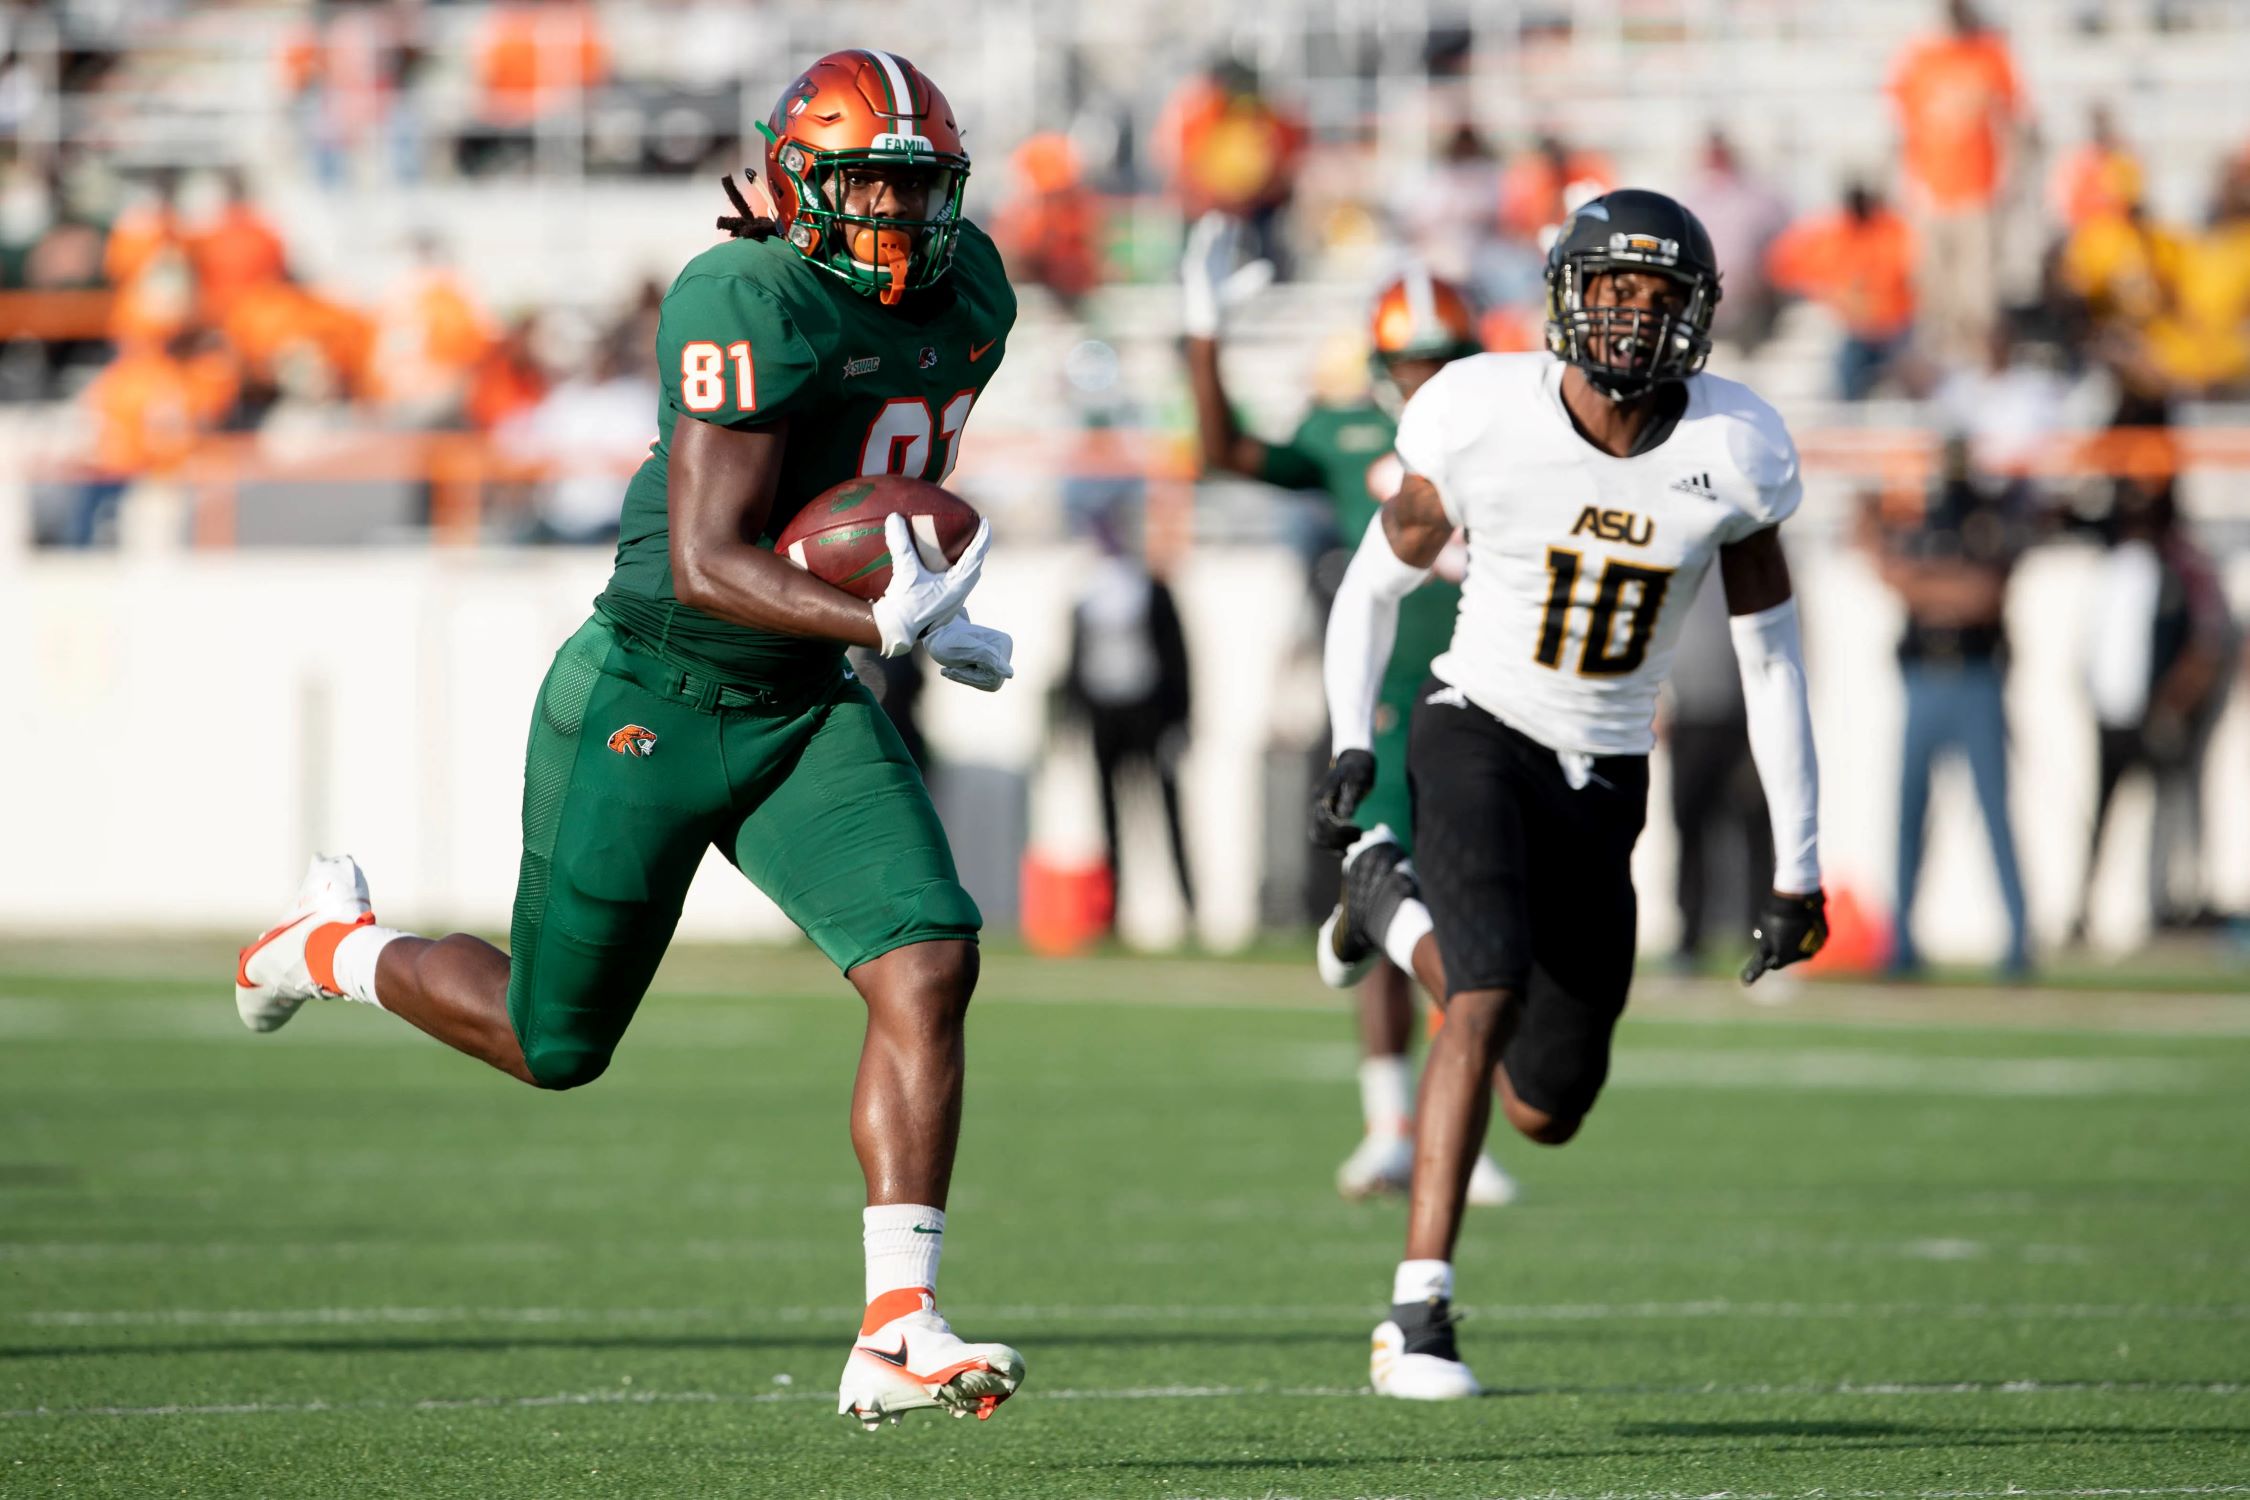 Alabama State Receiver Arrested For Assaulting Security Guard At FAMU Game